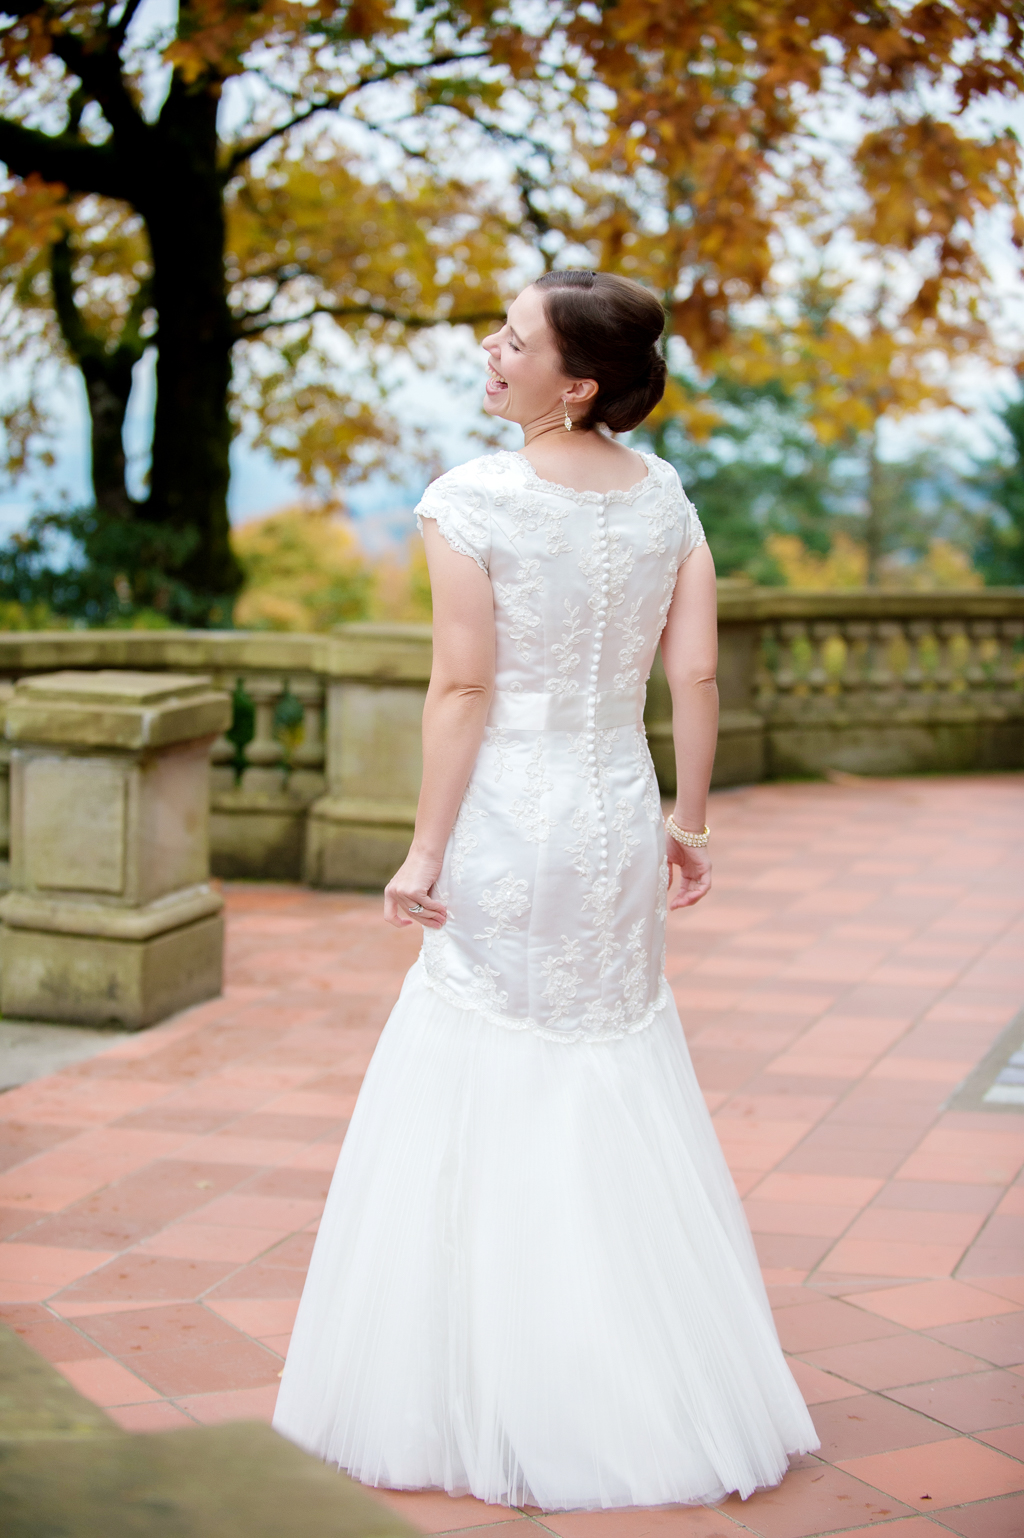 colorful fall leaves surround bride at pittock mansion